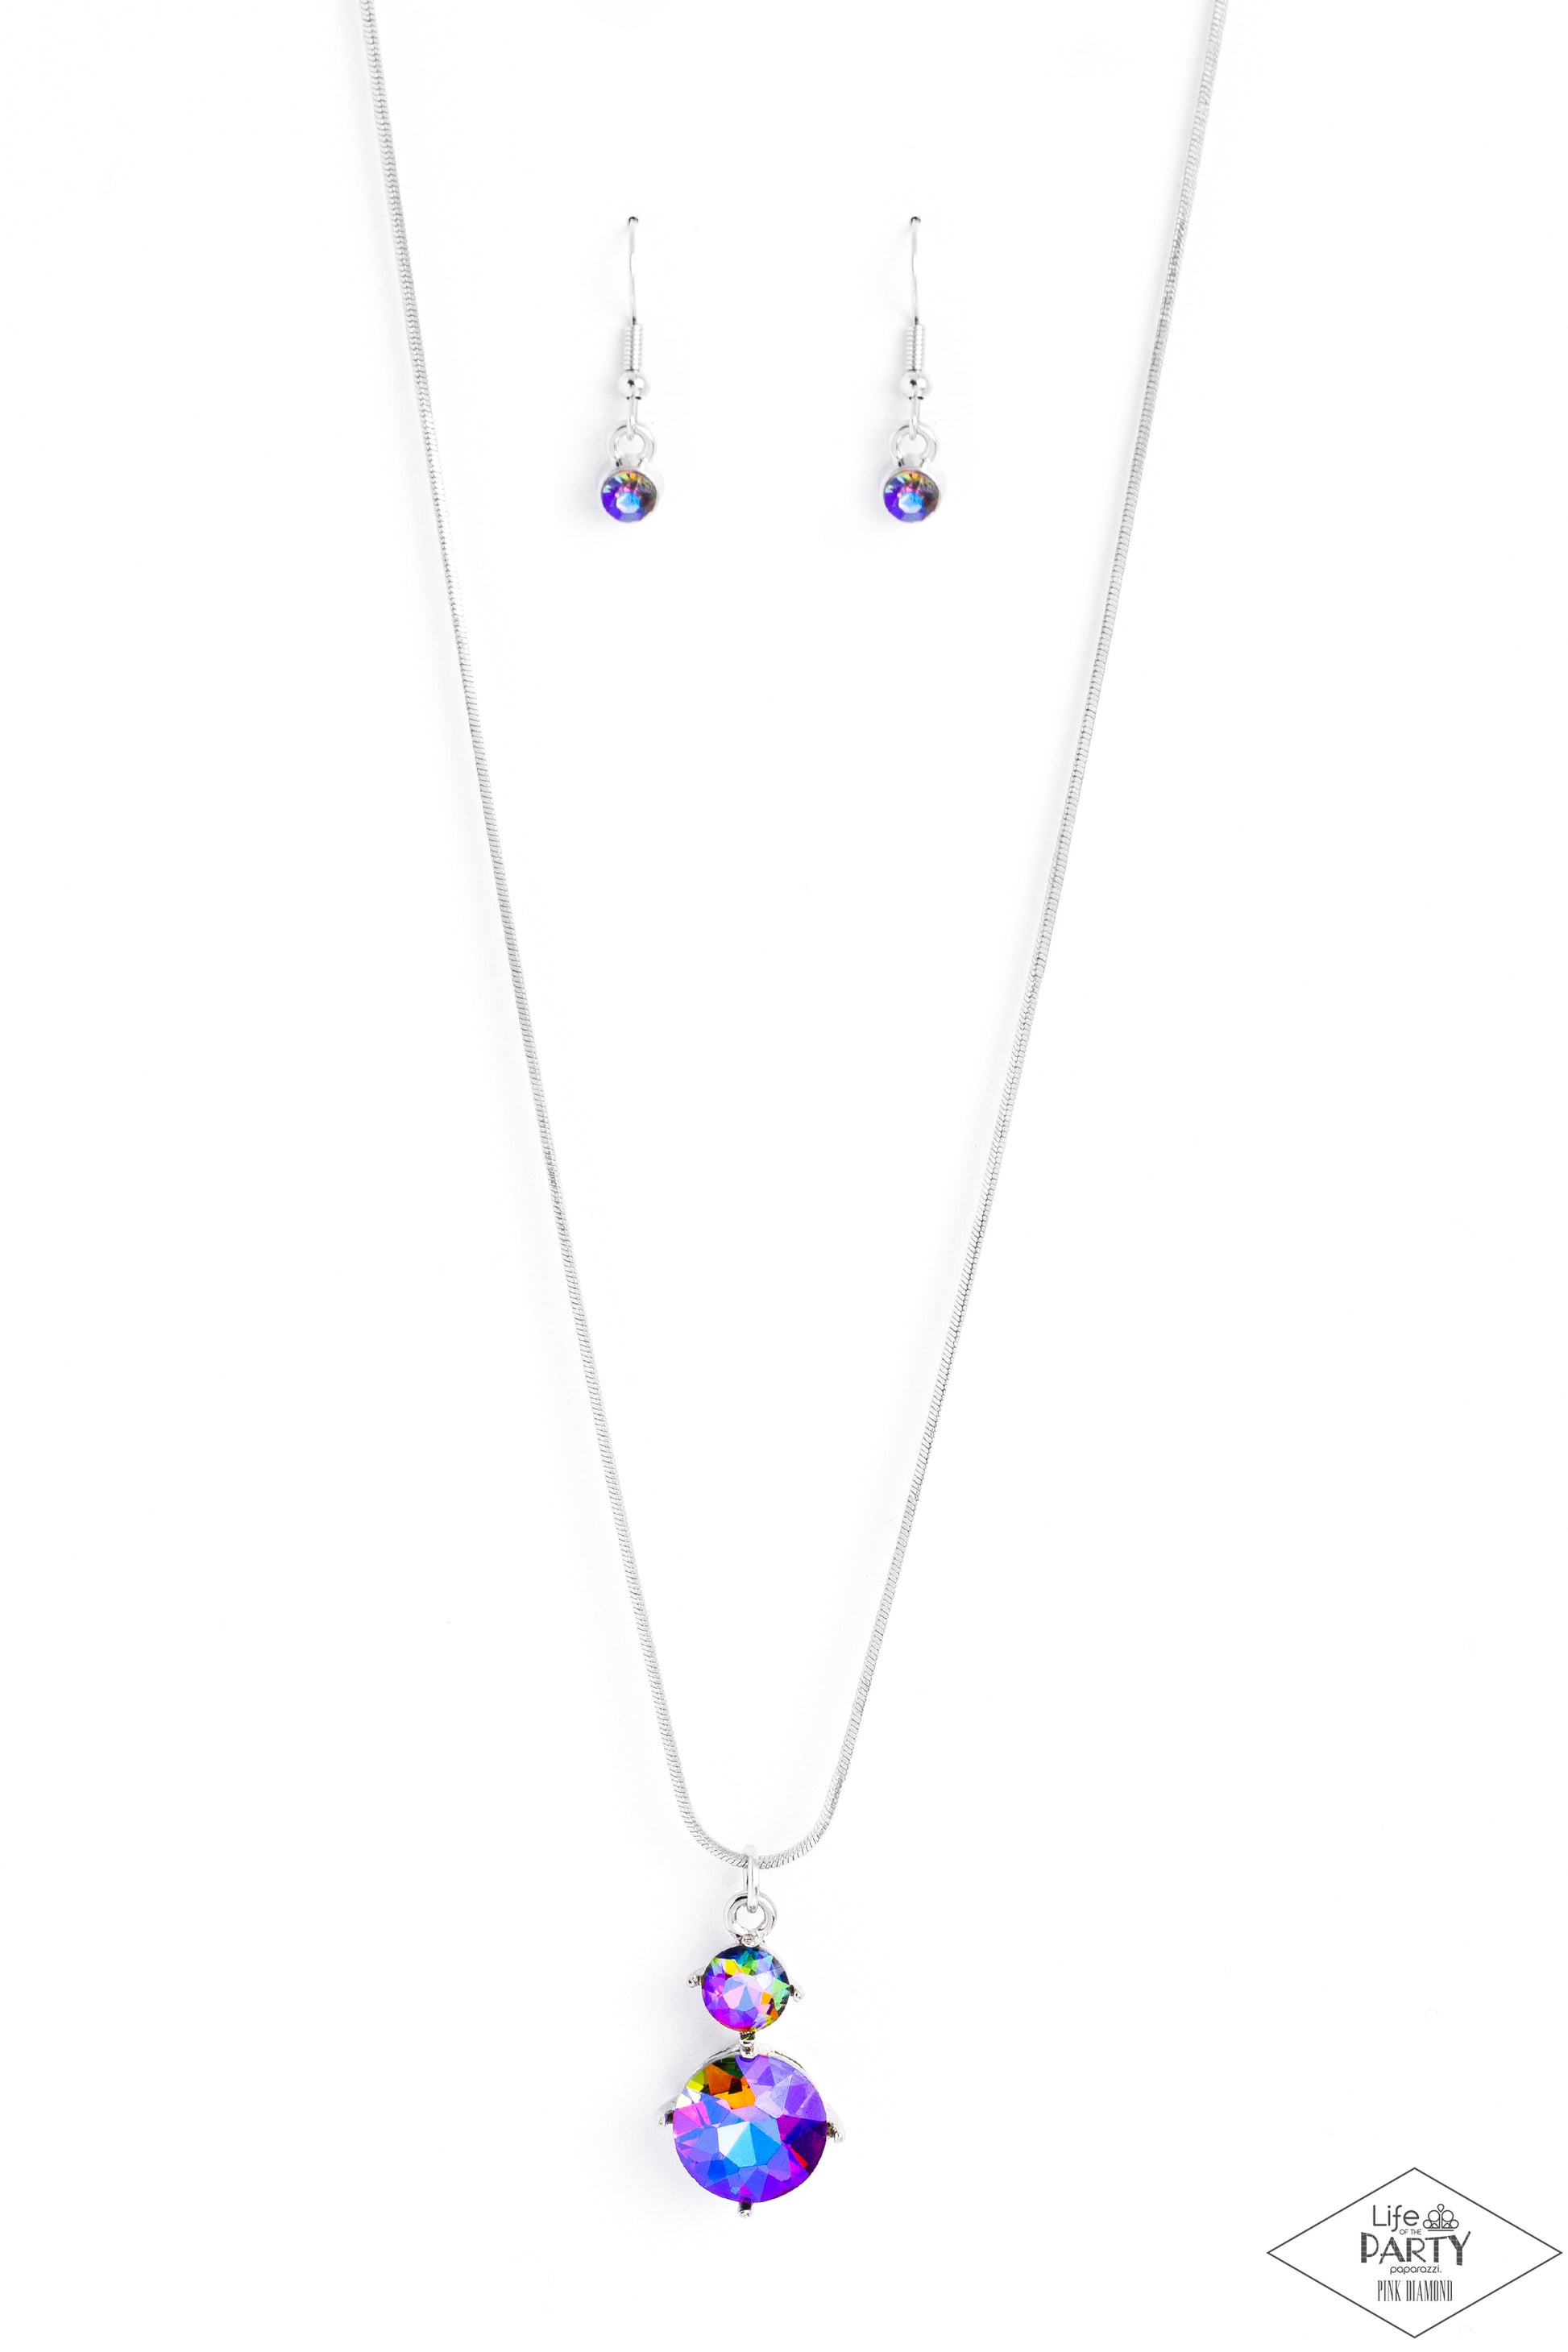 Top Dollar Diva Multi Necklace - Paparazzi Accessories  Nestled inside classic silver prongs, two oversized rhinestones, featuring a UV shimmer, slide along a dainty silver snake chain, creating a dramatic pendant below the collar. Features an adjustable clasp closure.  Sold as one individual necklace. Includes one pair of matching earrings.  P2RE-MTXX-222XX  New KitENCORE This Pink Diamond Encore is back in the spotlight at the request of our 2023 Life of the Party member with Pink Diamond Access, Mandi W.